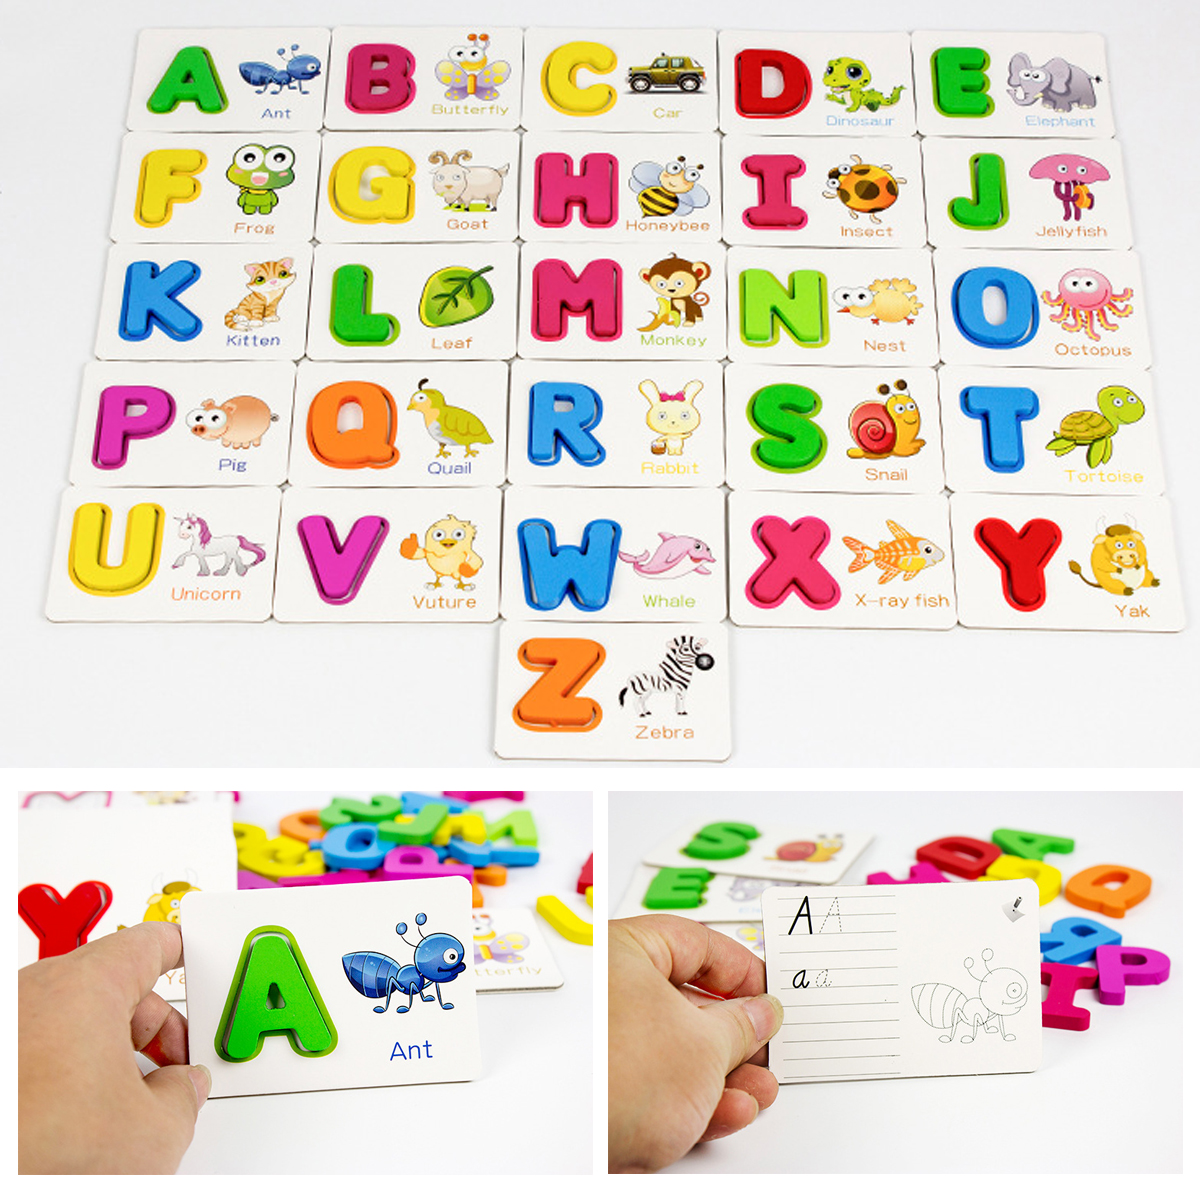 Puzzle-Alphabet-Spelling-English-Letters-Animal-Cards-Educational-Learning-Toy-for-Kids-Gift-1726968-6